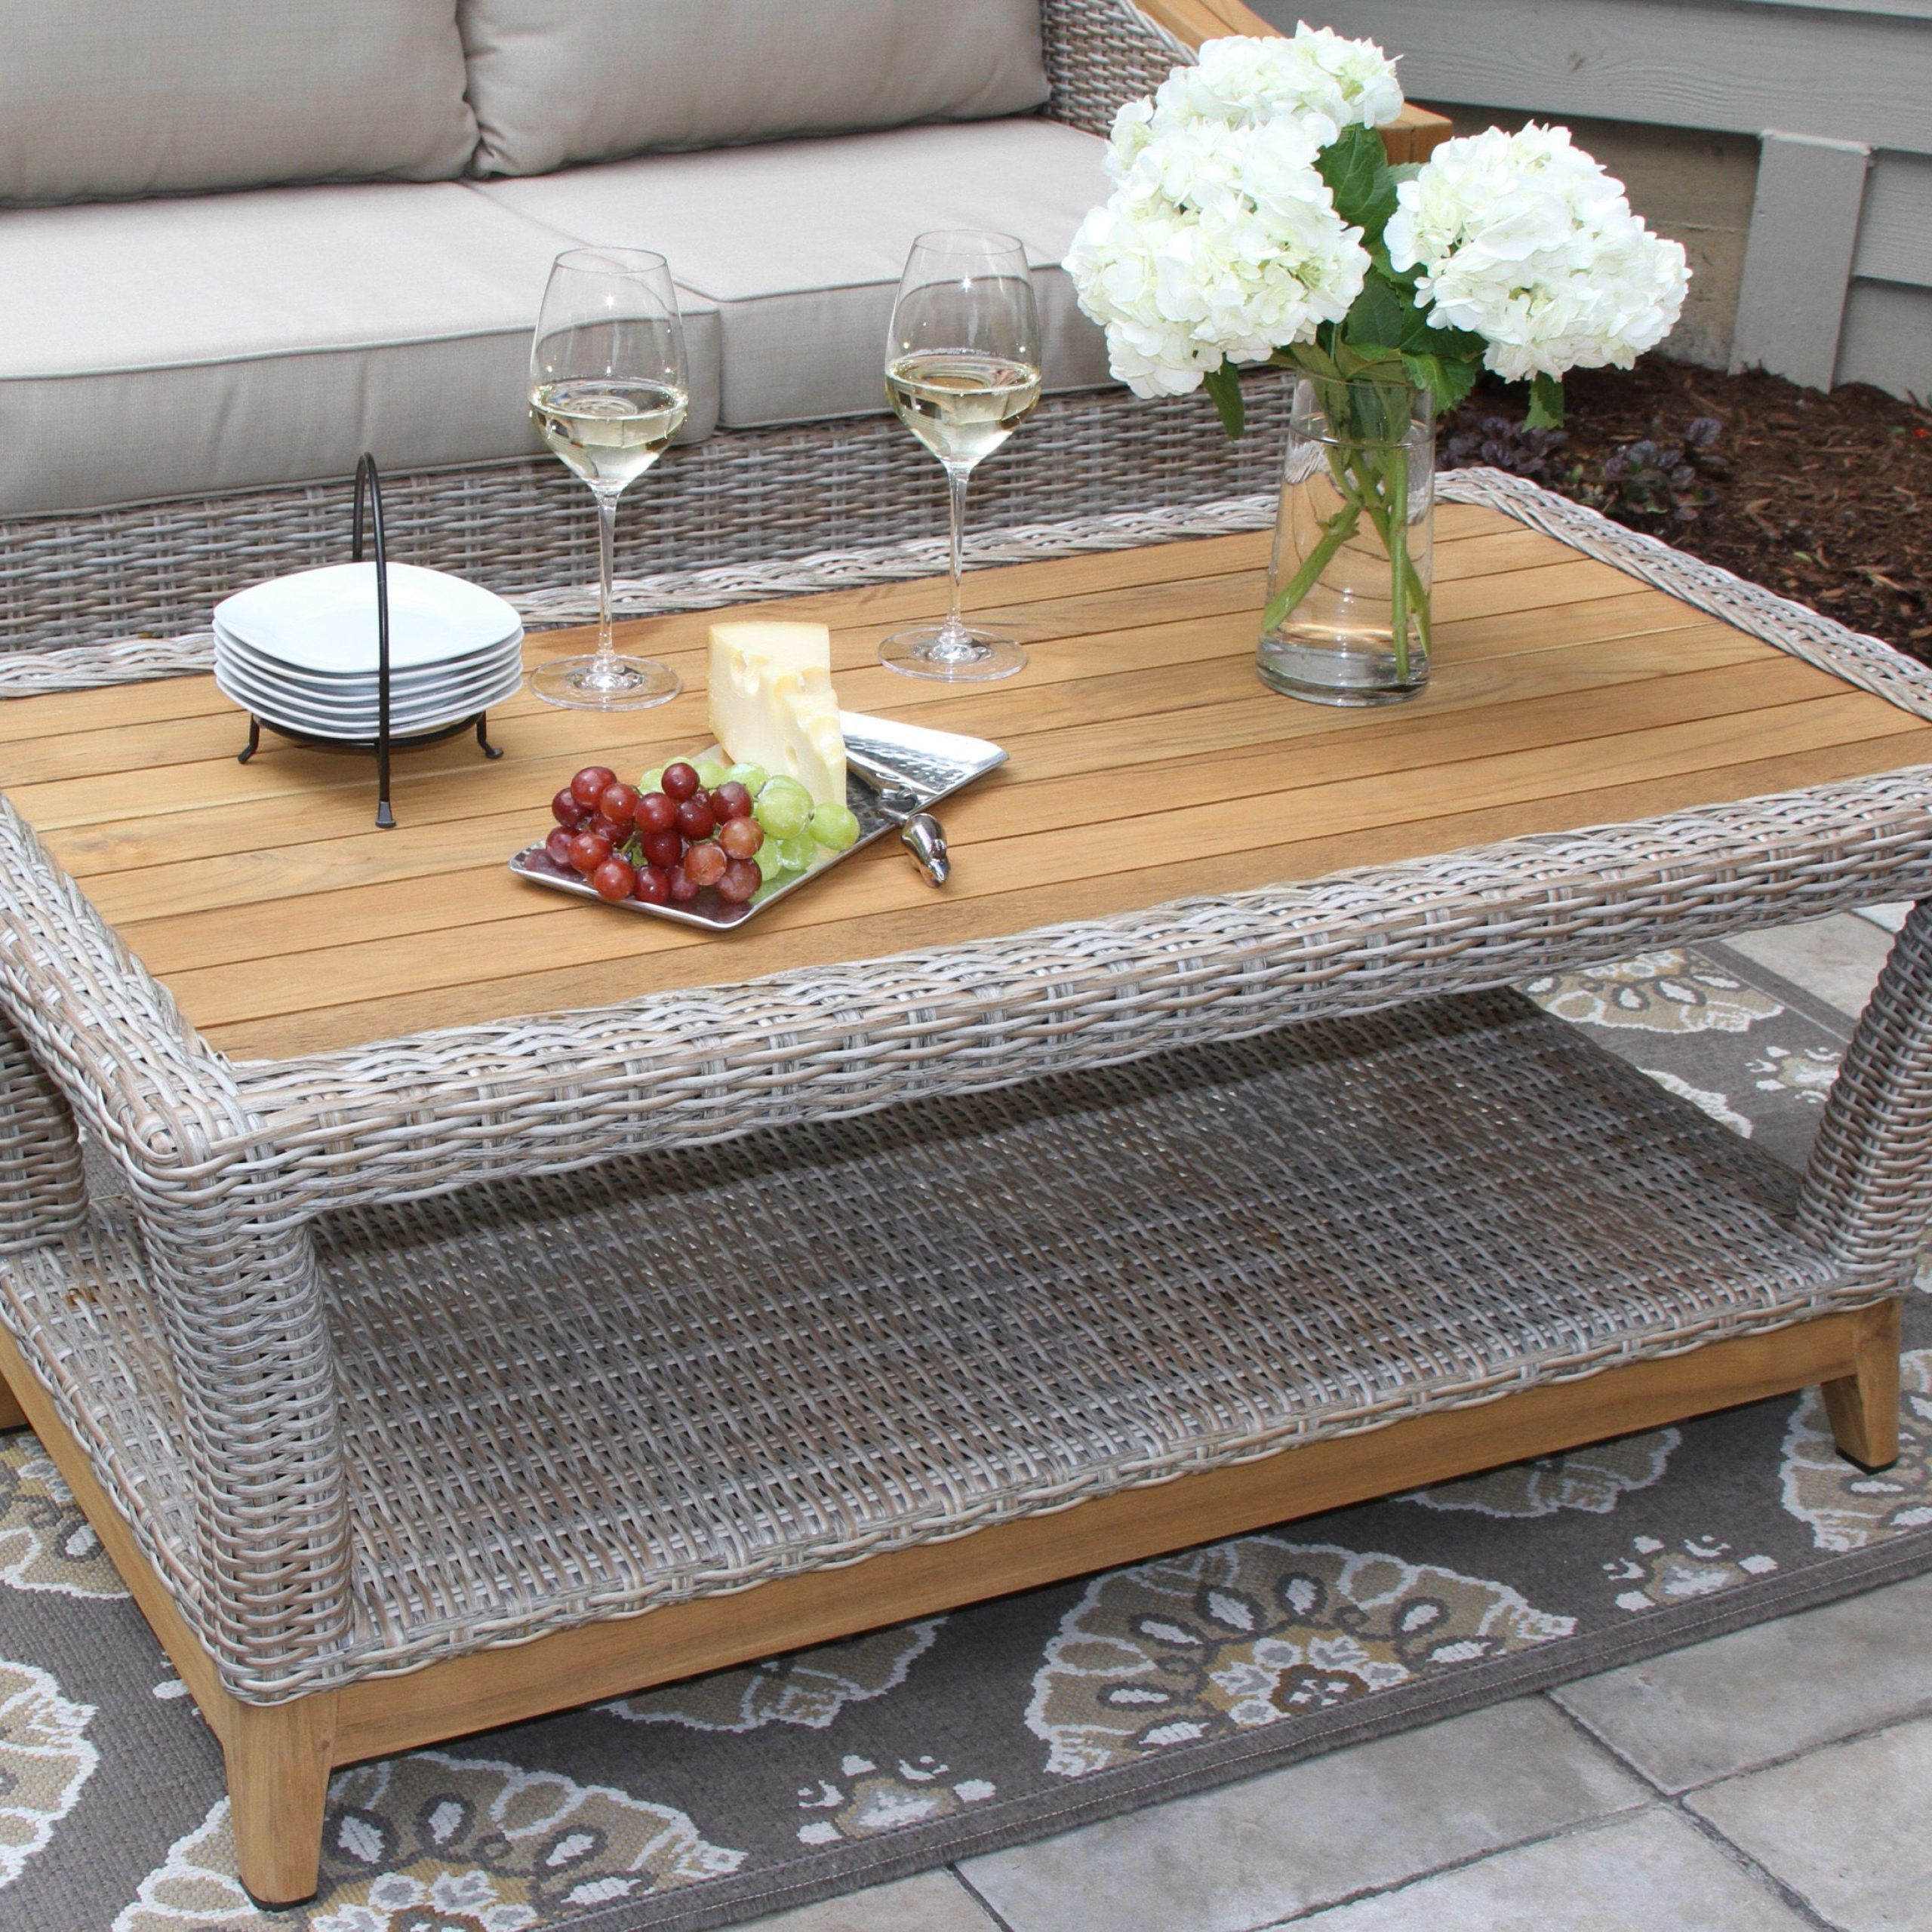 Best And Newest How To Decorate An Outdoor Coffee Table – Coffee Table Decor With Regard To Outdoor Coffee Tables With Storage (View 7 of 15)